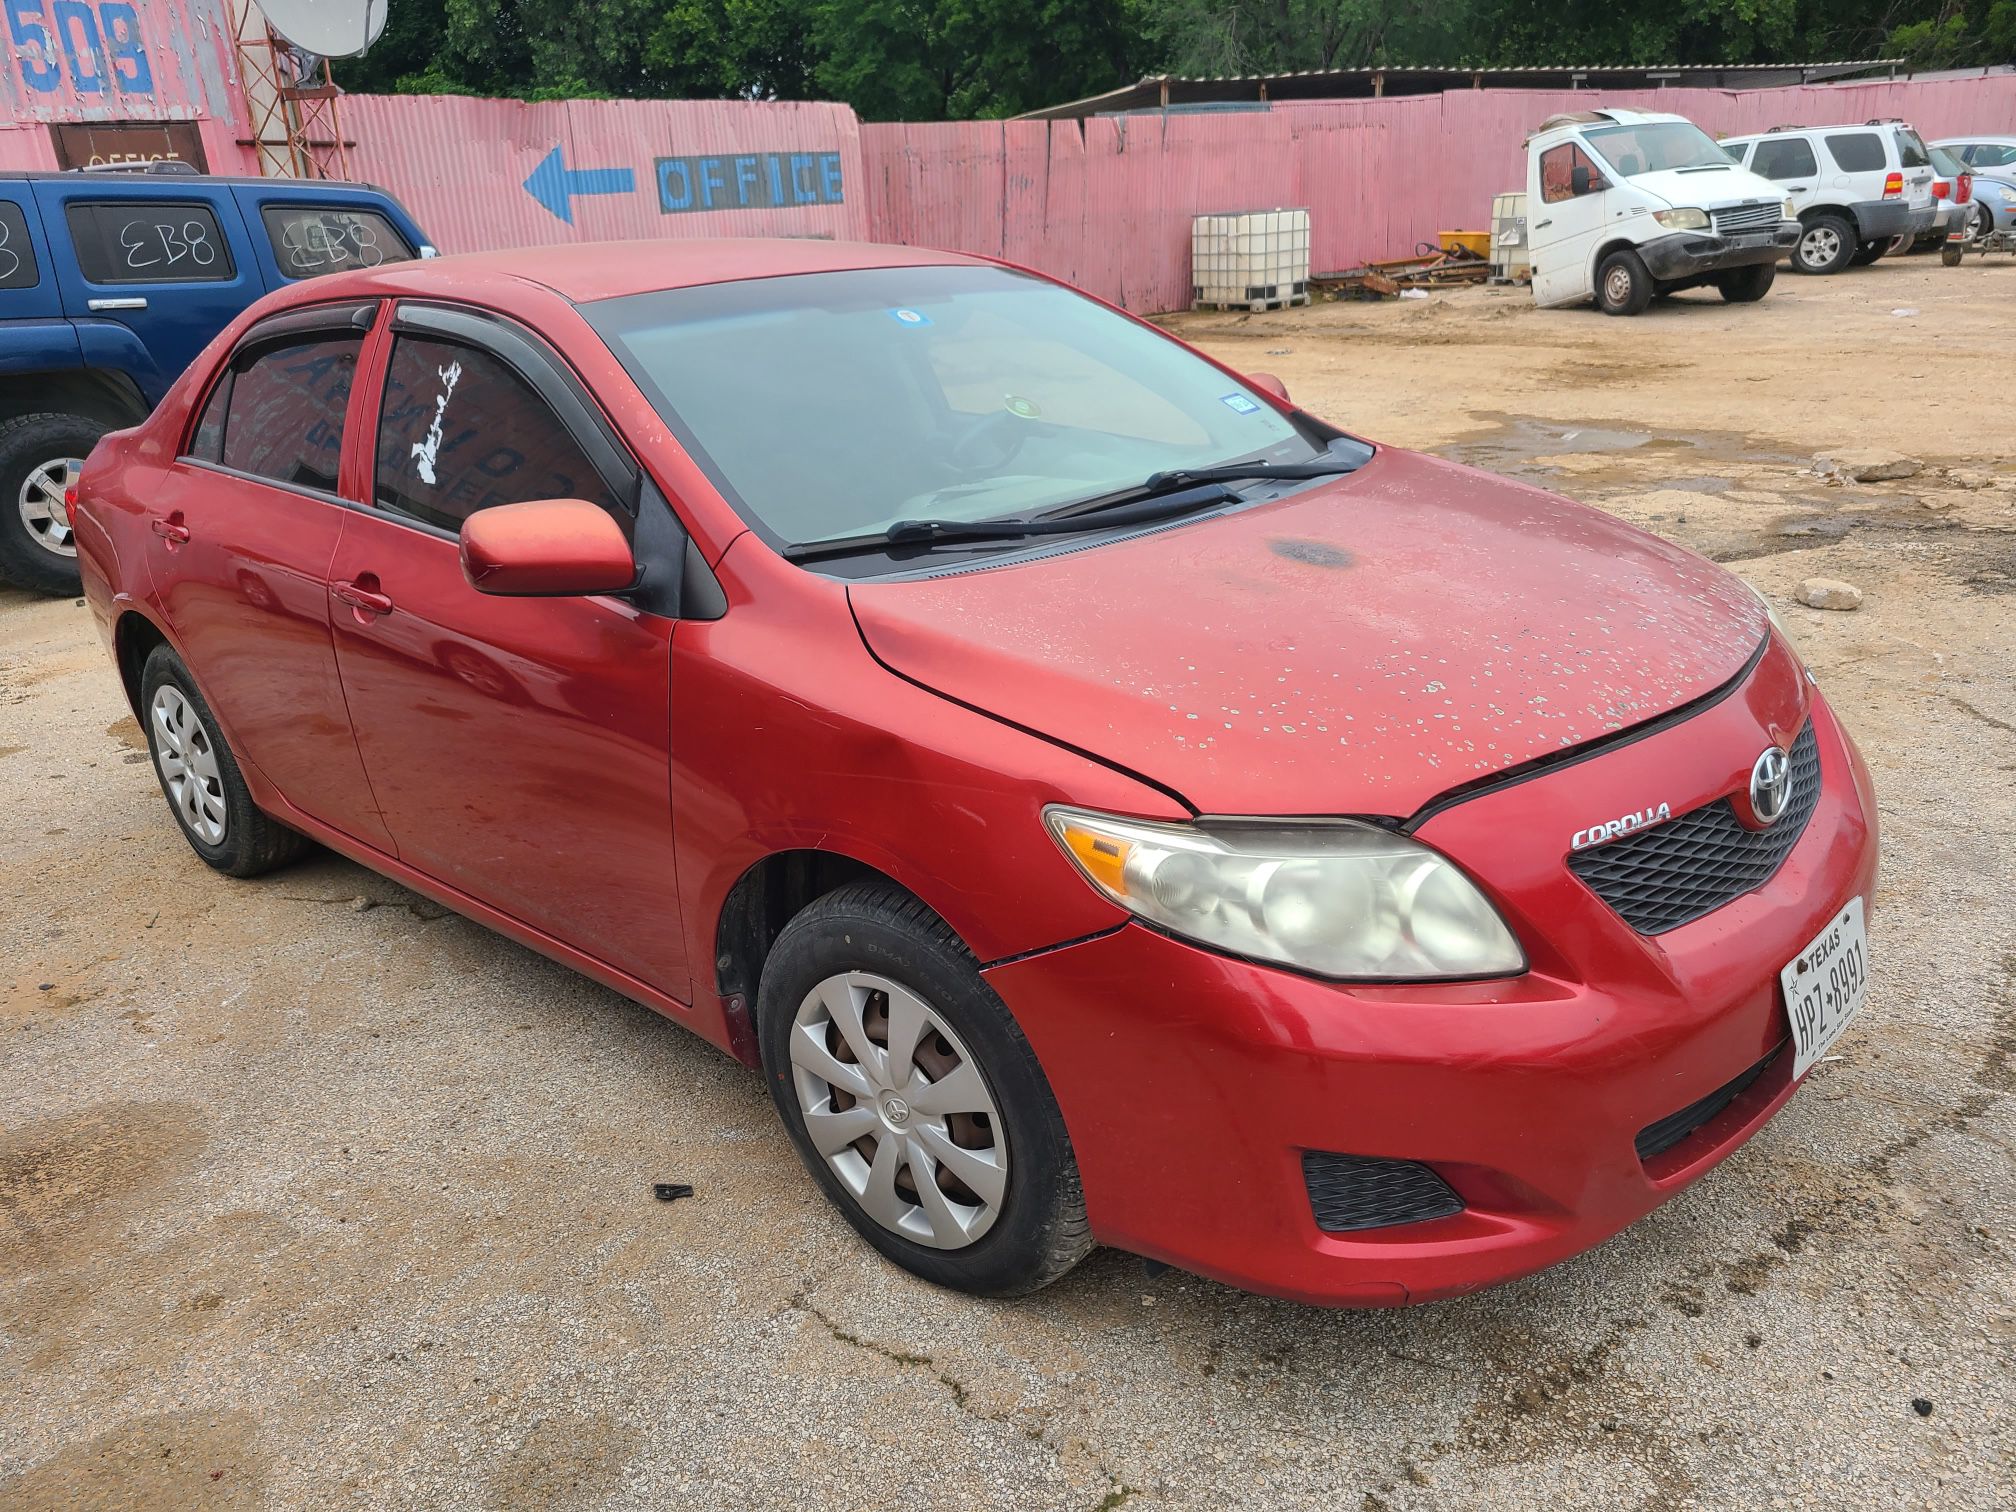 2009 Toyota Corolla - Parts Only #EC3